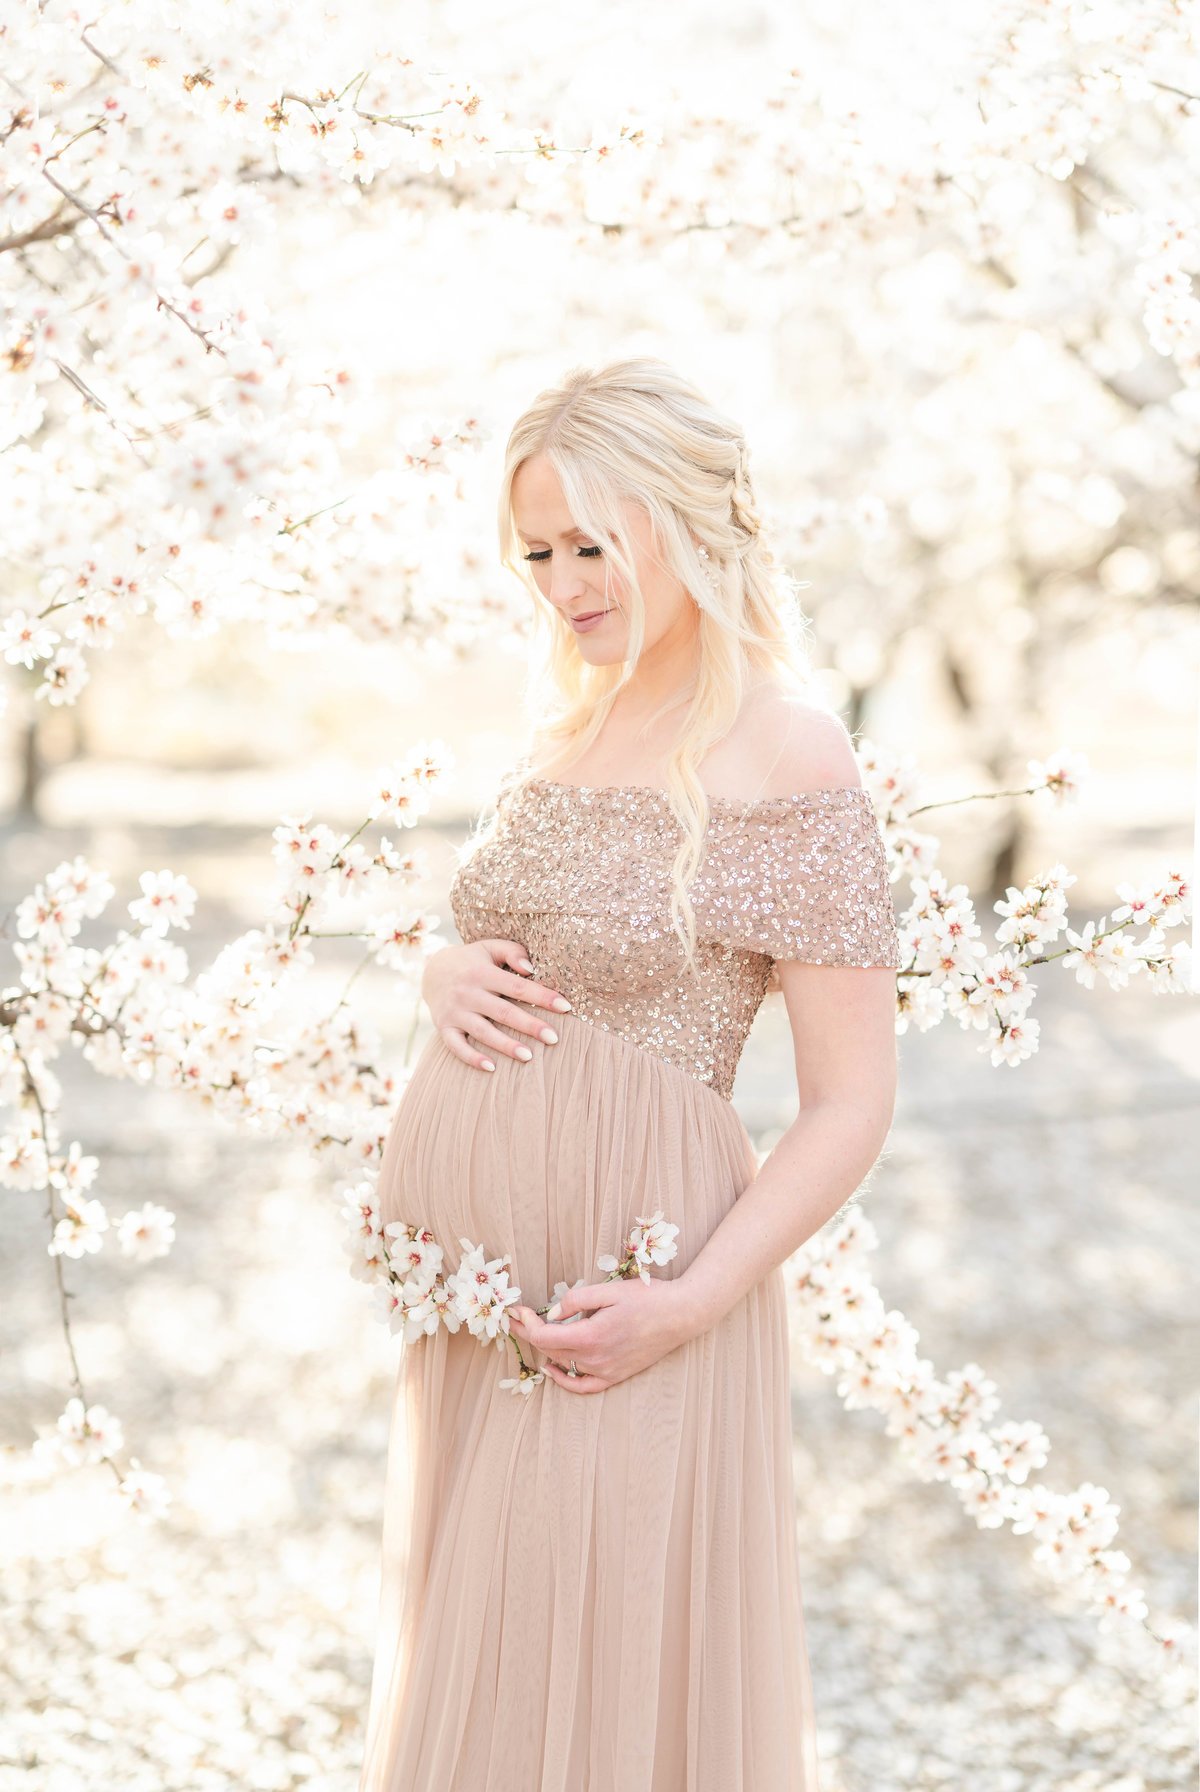 A maternity session photographed by Bay Area Photographer, Light Livin Photography shows an expecting mother caresses her baby bump dressed in a blush gown standing in an almond blossom field.